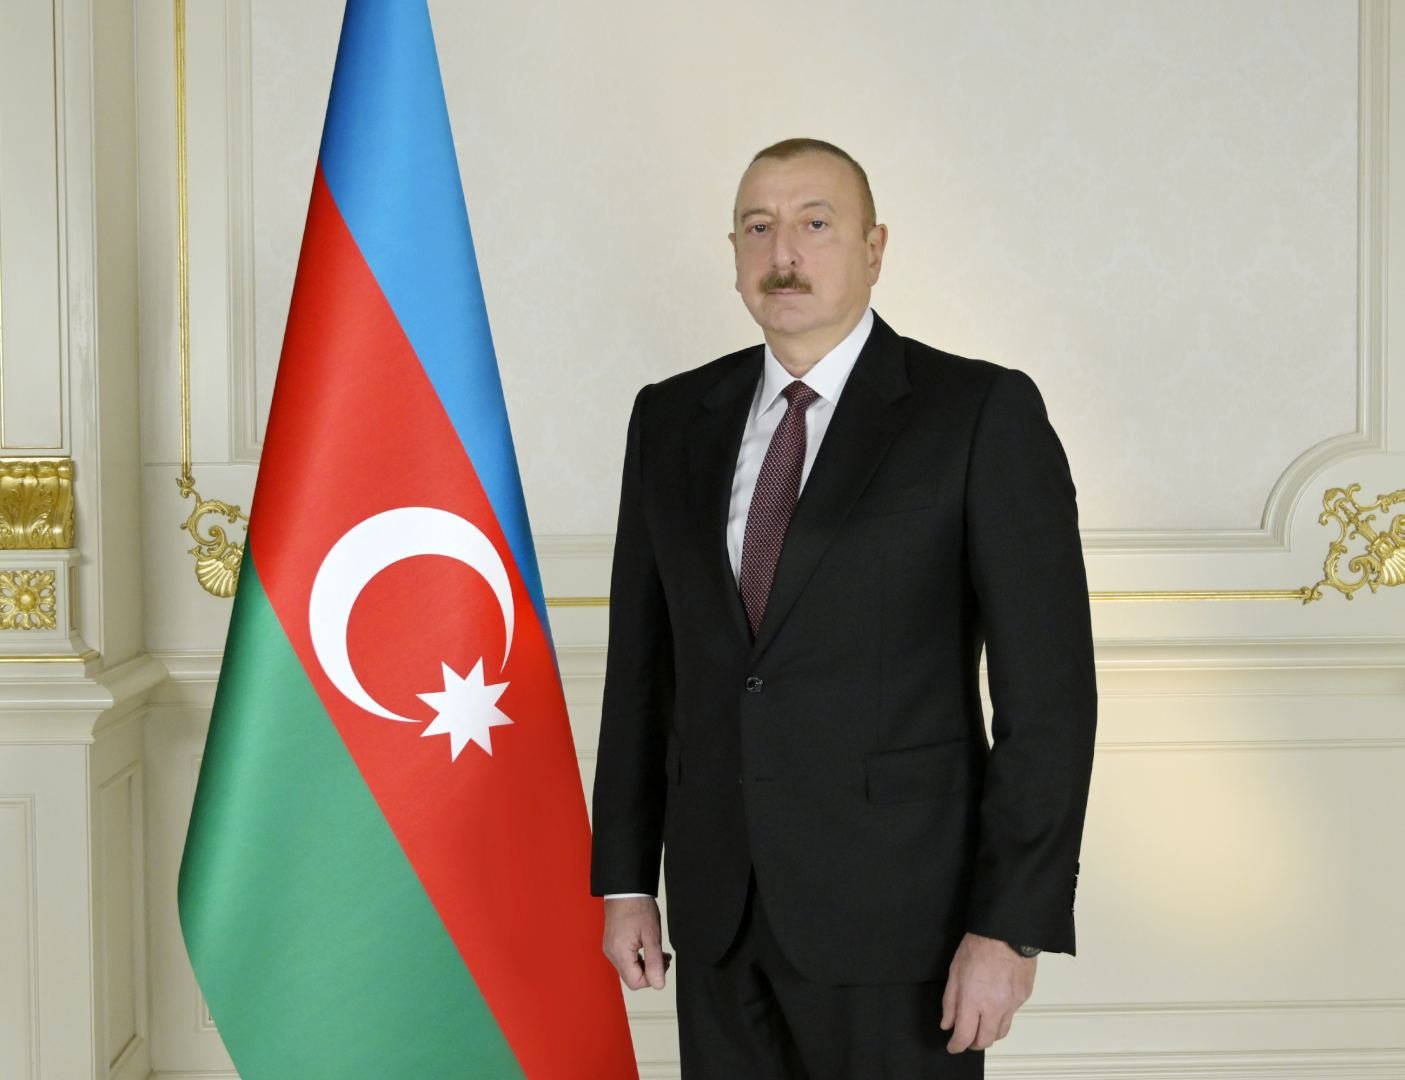 Decisions taken at trilateral meeting in Sochi to contribute to safer and more predictable situation in South Caucasus - President Aliyev